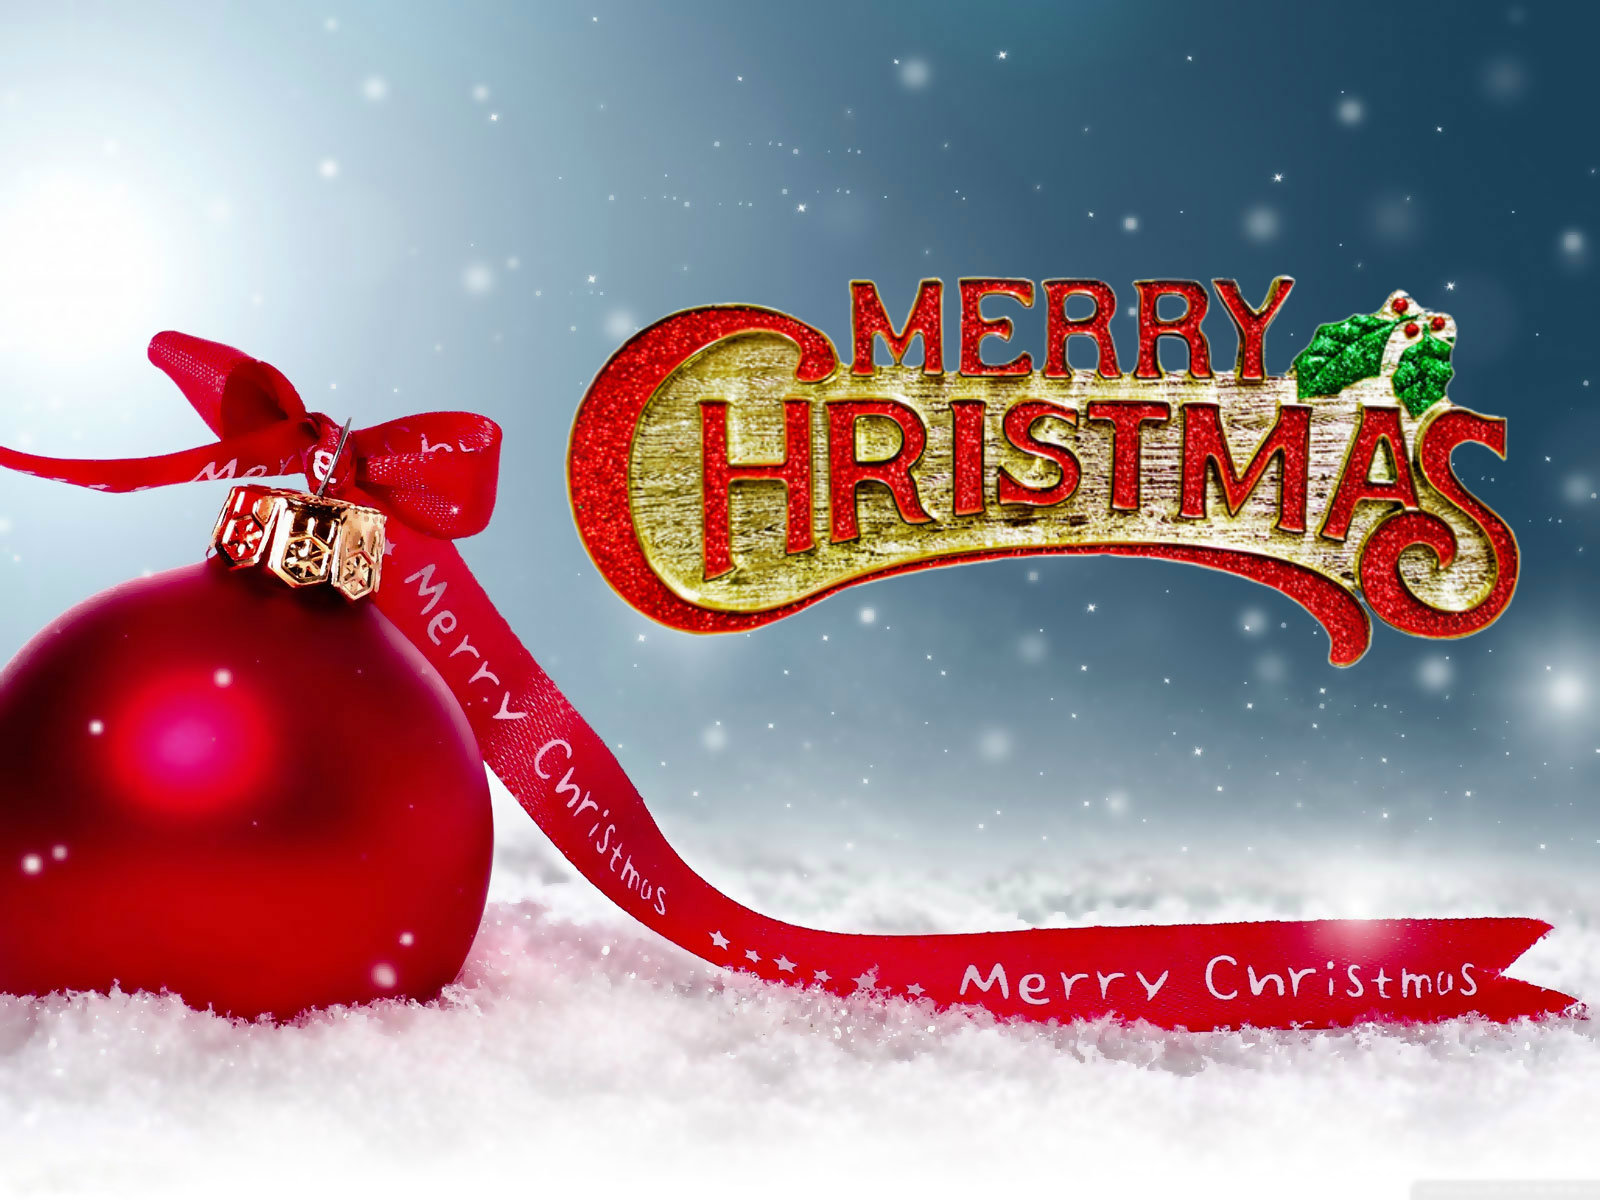 Merry Christmas 2018 Wishes, Quotes, Images, Wallpapers For Friends - Happy New Year 2019